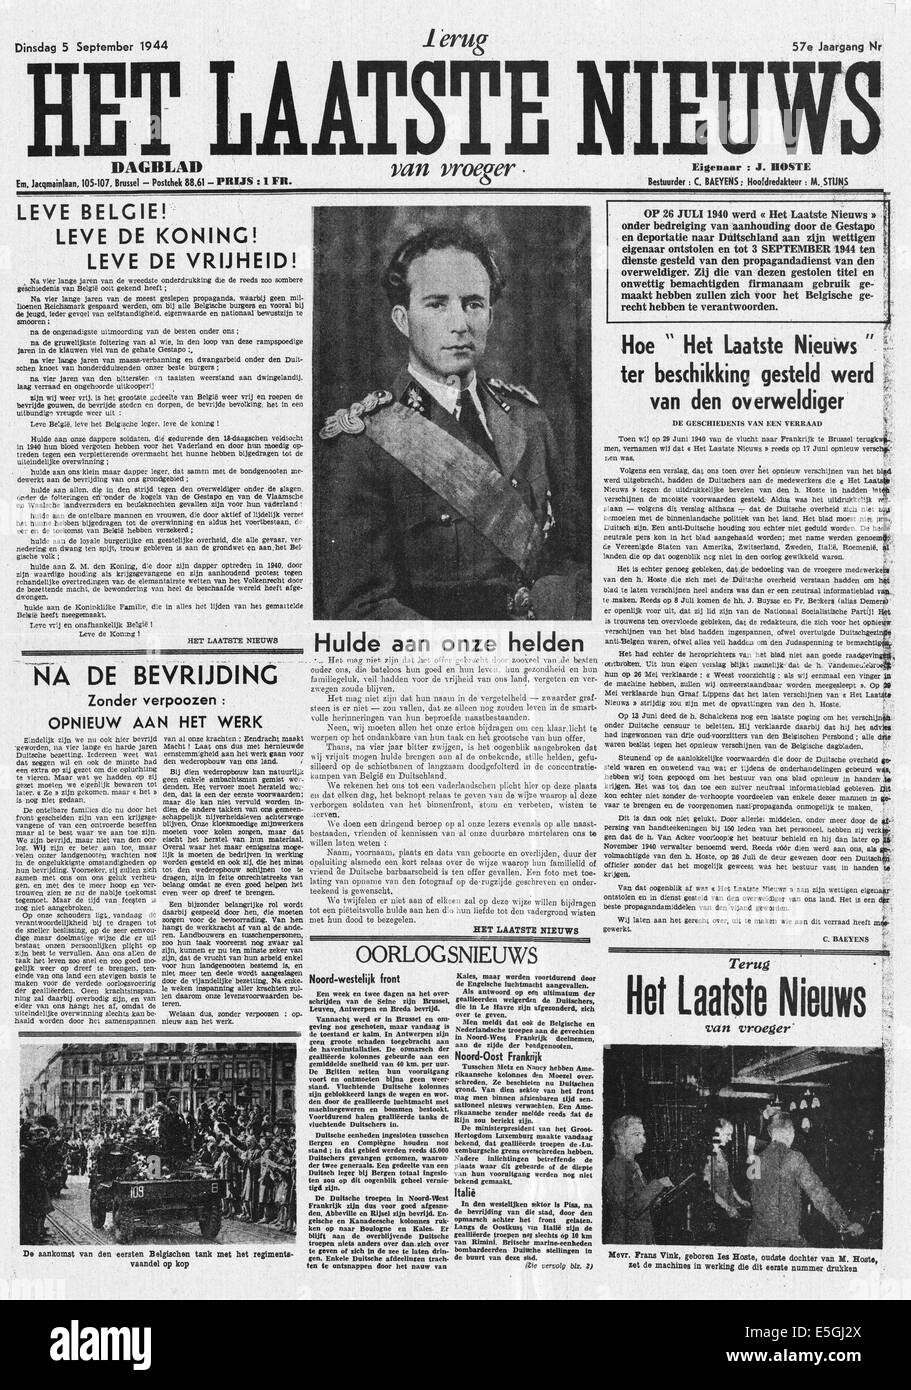 1944 Het Laatste Nieuws (Belgium) front page reporting Belgium liberated by Allied forces with the headline 'Long Live Belgium, Long Live the King, Long Live Freedom' Stock Photo